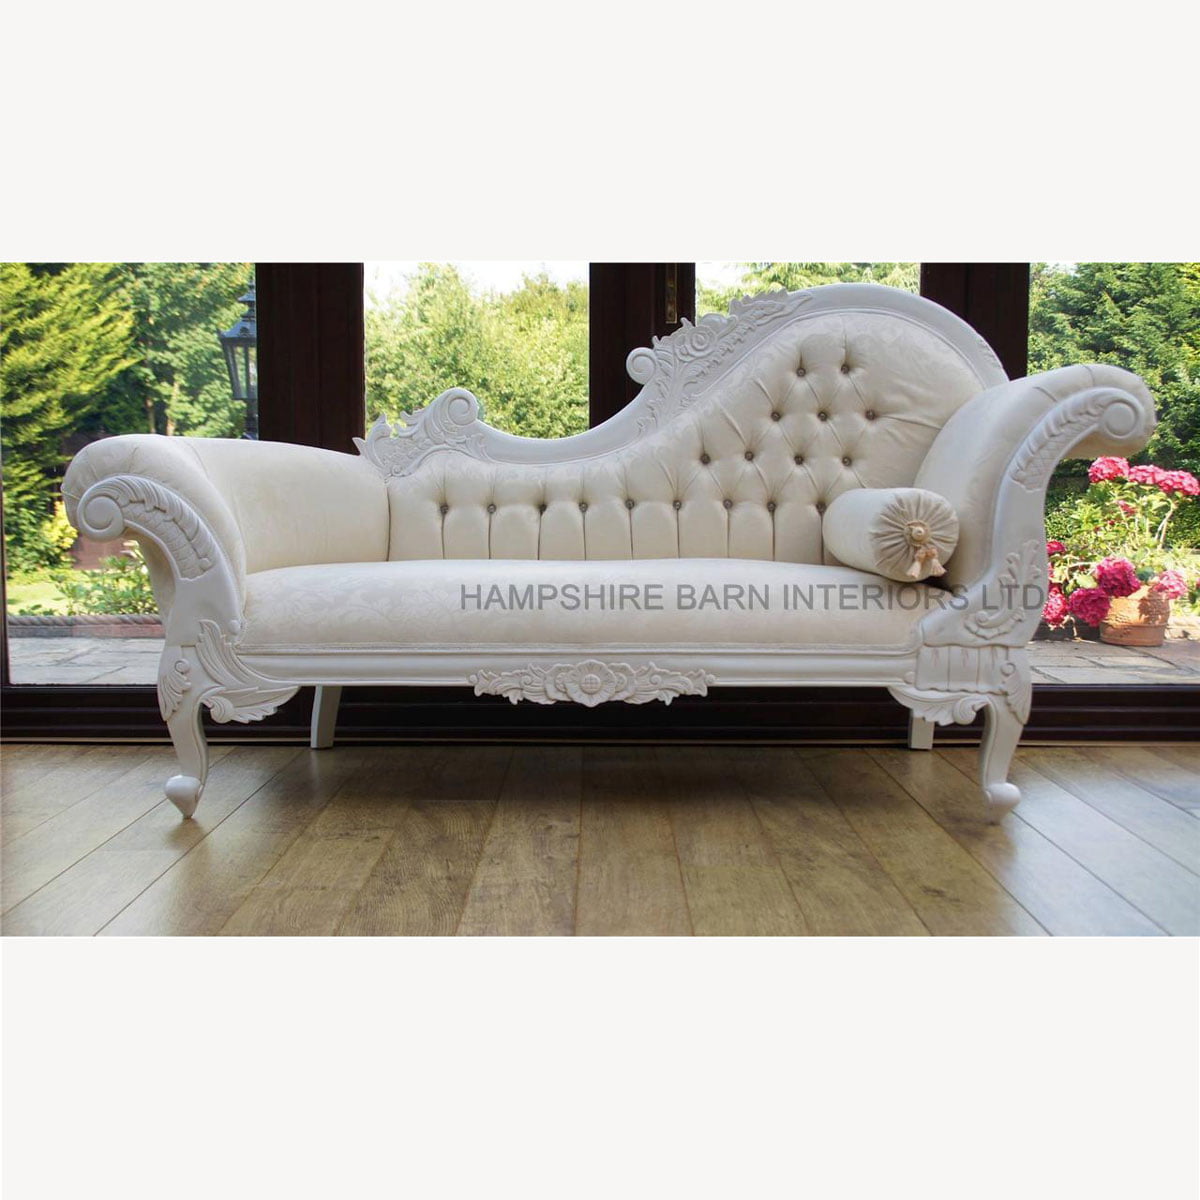 An Antique White Ornate Medium Hampshire Chaise with ivory cream fabric with crystal buttoning 5 - Hampshire Barn Interiors - Antique White Ornate Medium Hampshire Chaise With Ivory Cream Fabric With Crystal Buttoning -